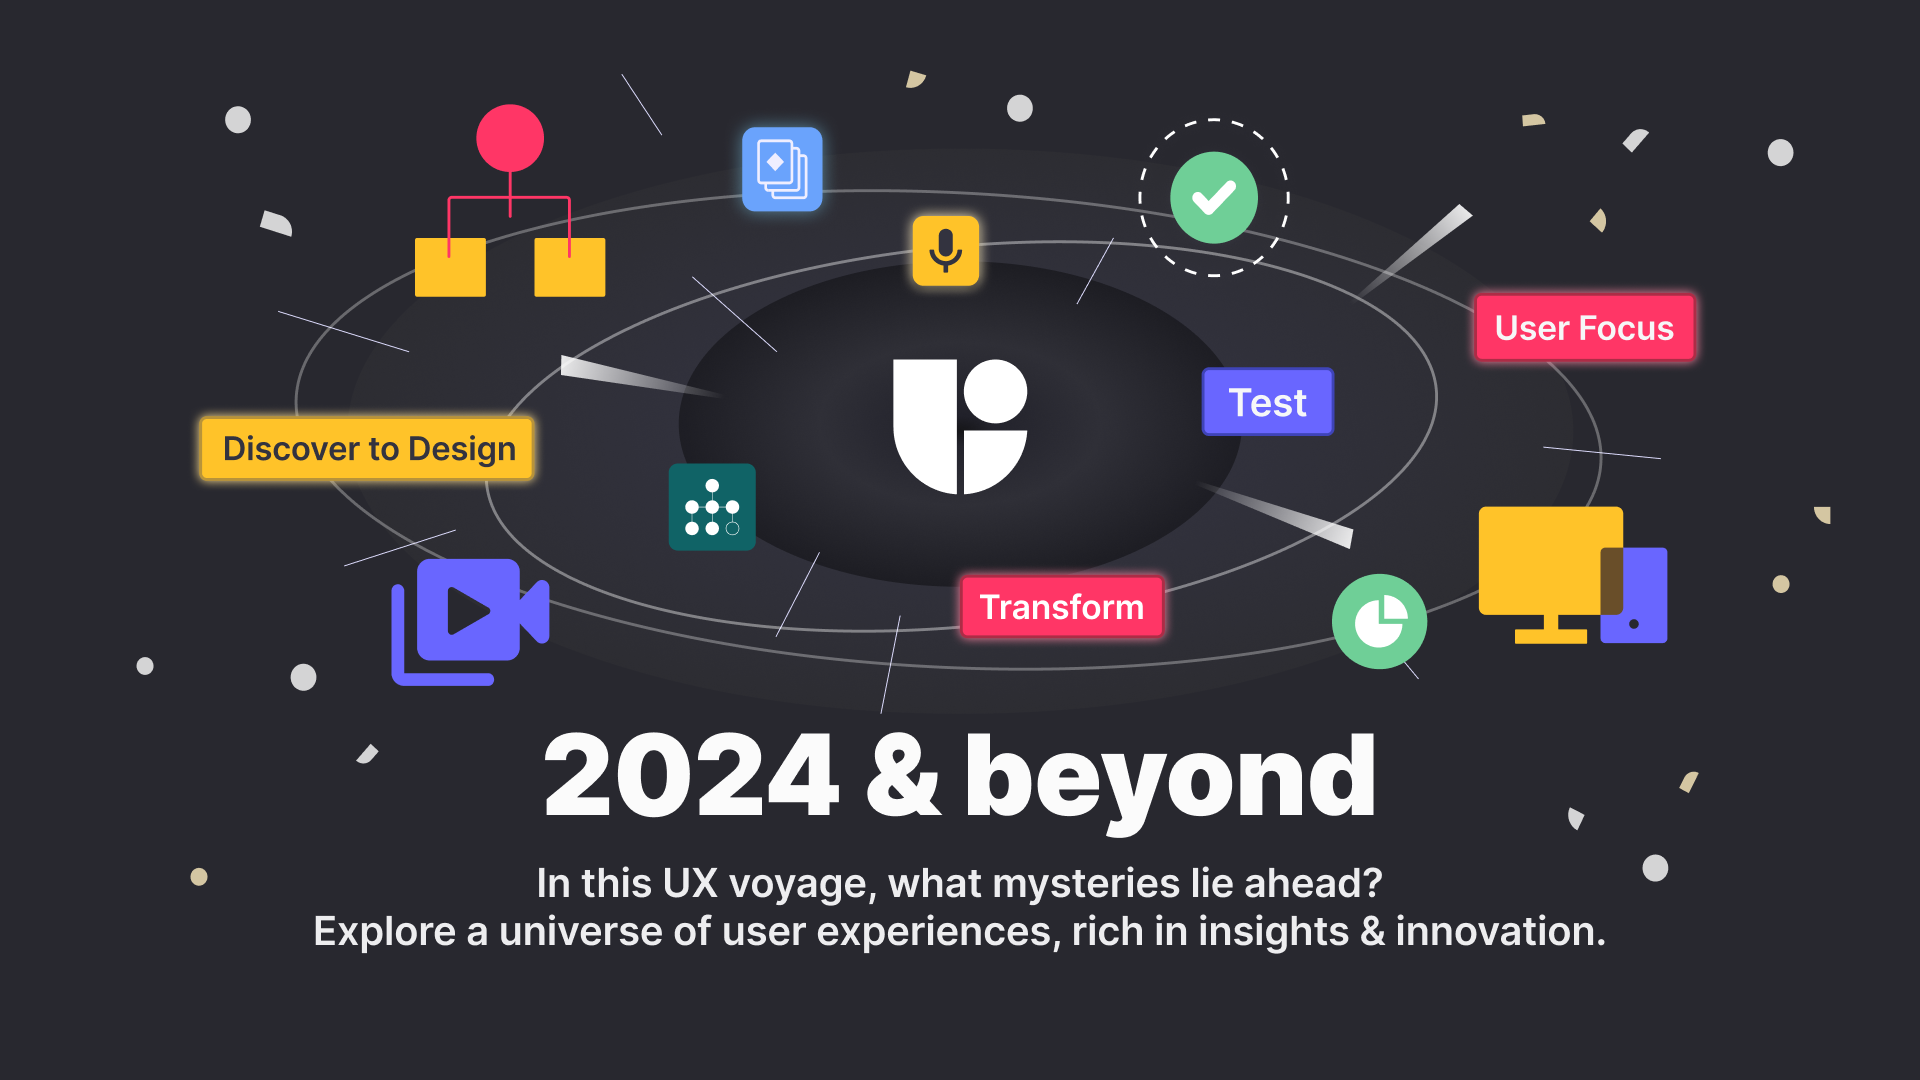 Graphic titled '2024 & beyond' set against a space-themed background, illustrating the UX design process as an orbital journey with stages labeled 'Discover to Design,' 'Test,' and 'Transform.' Central to the image is the Useberry logo, surrounded by icons representing different stages of user experience, including a video play symbol, a checklist, and a desktop monitor. The tagline reads 'In this UX voyage, what mysteries lie ahead? Explore a universe of user experiences, rich in insights & innovation."